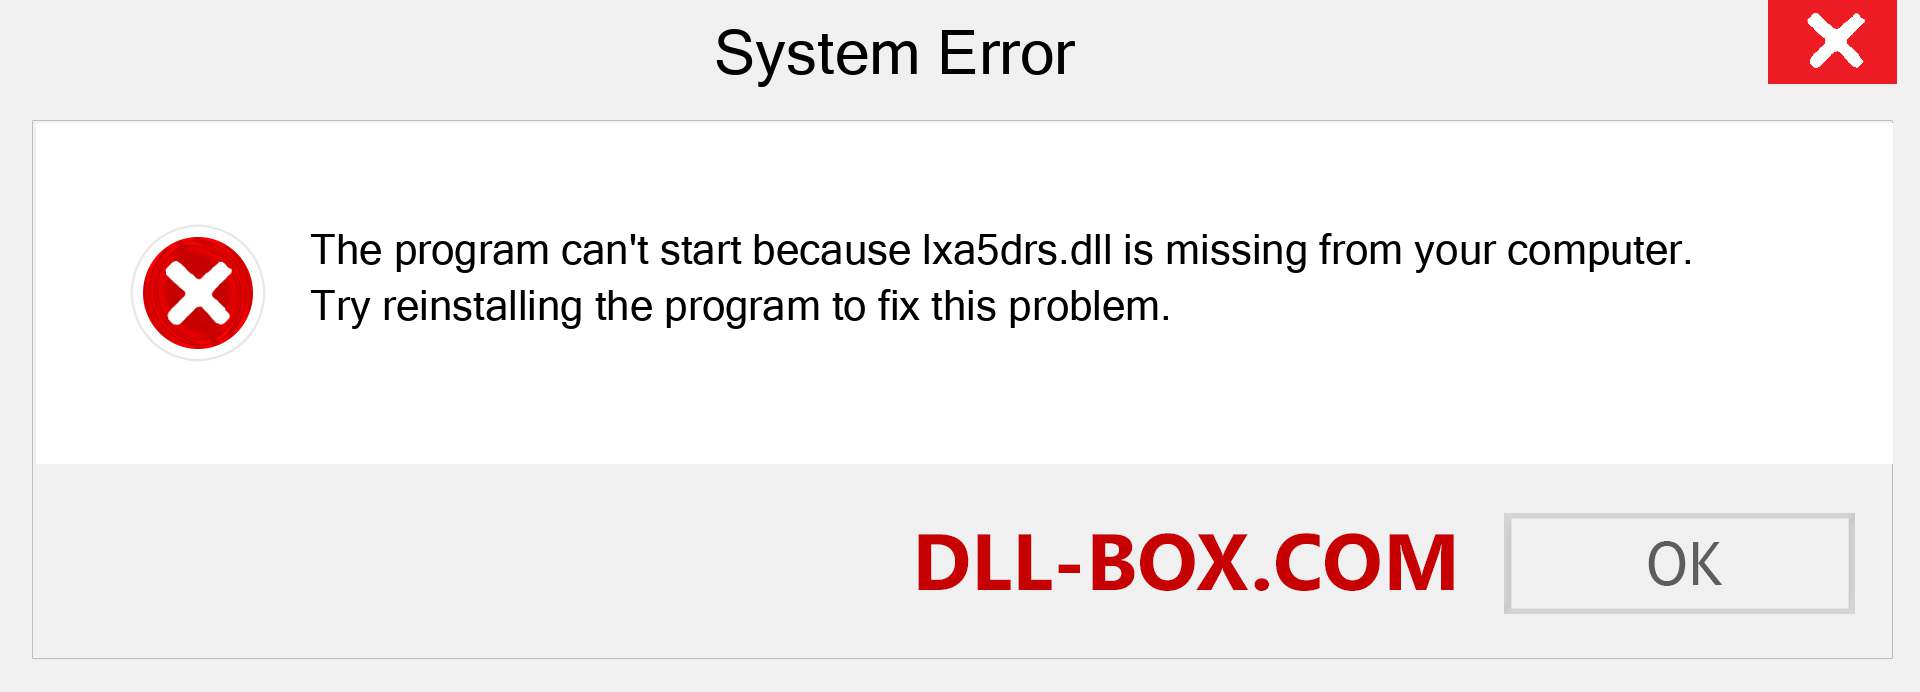  lxa5drs.dll file is missing?. Download for Windows 7, 8, 10 - Fix  lxa5drs dll Missing Error on Windows, photos, images